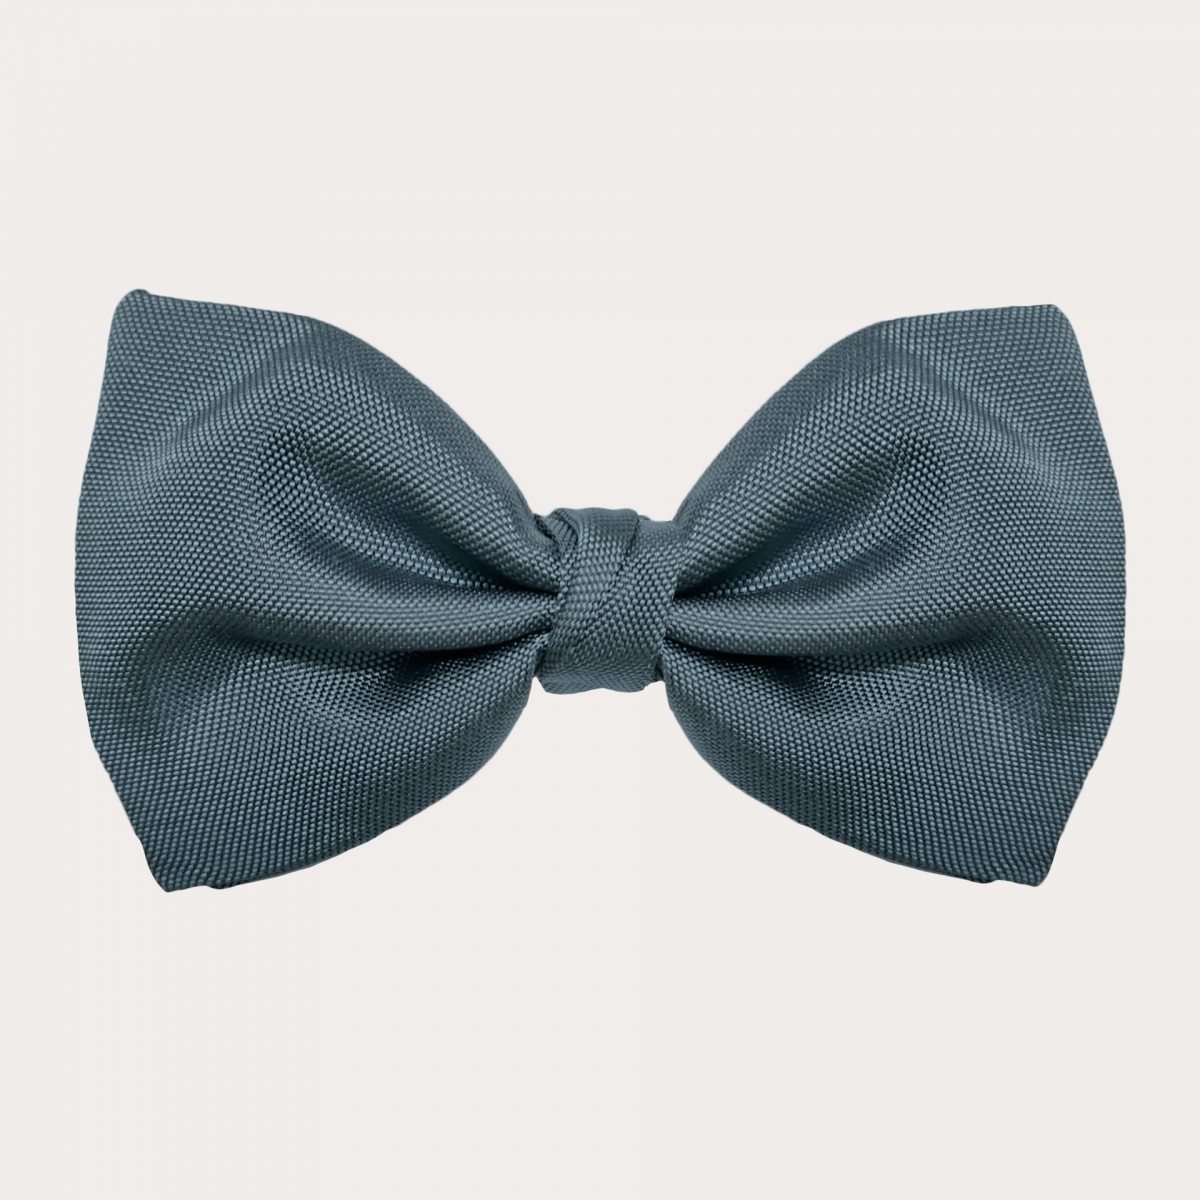 BRUCLE Elegant suspenders, bow tie and pochette in dusty blue silk